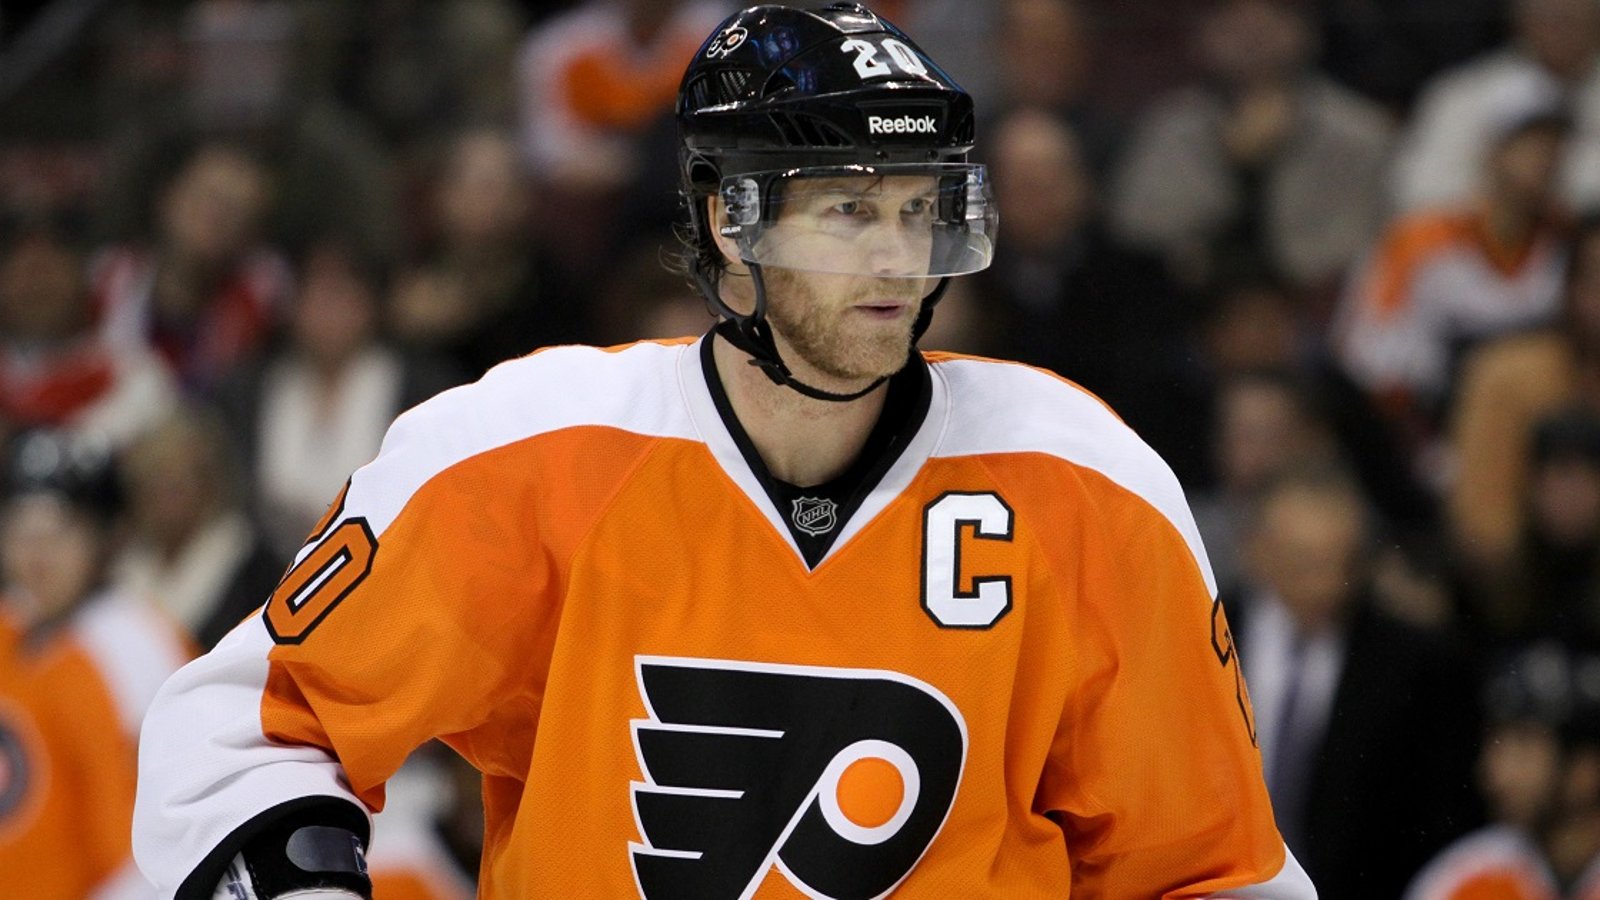 Breaking: Chris Pronger could look to join an NHL team when his contract expires this month.